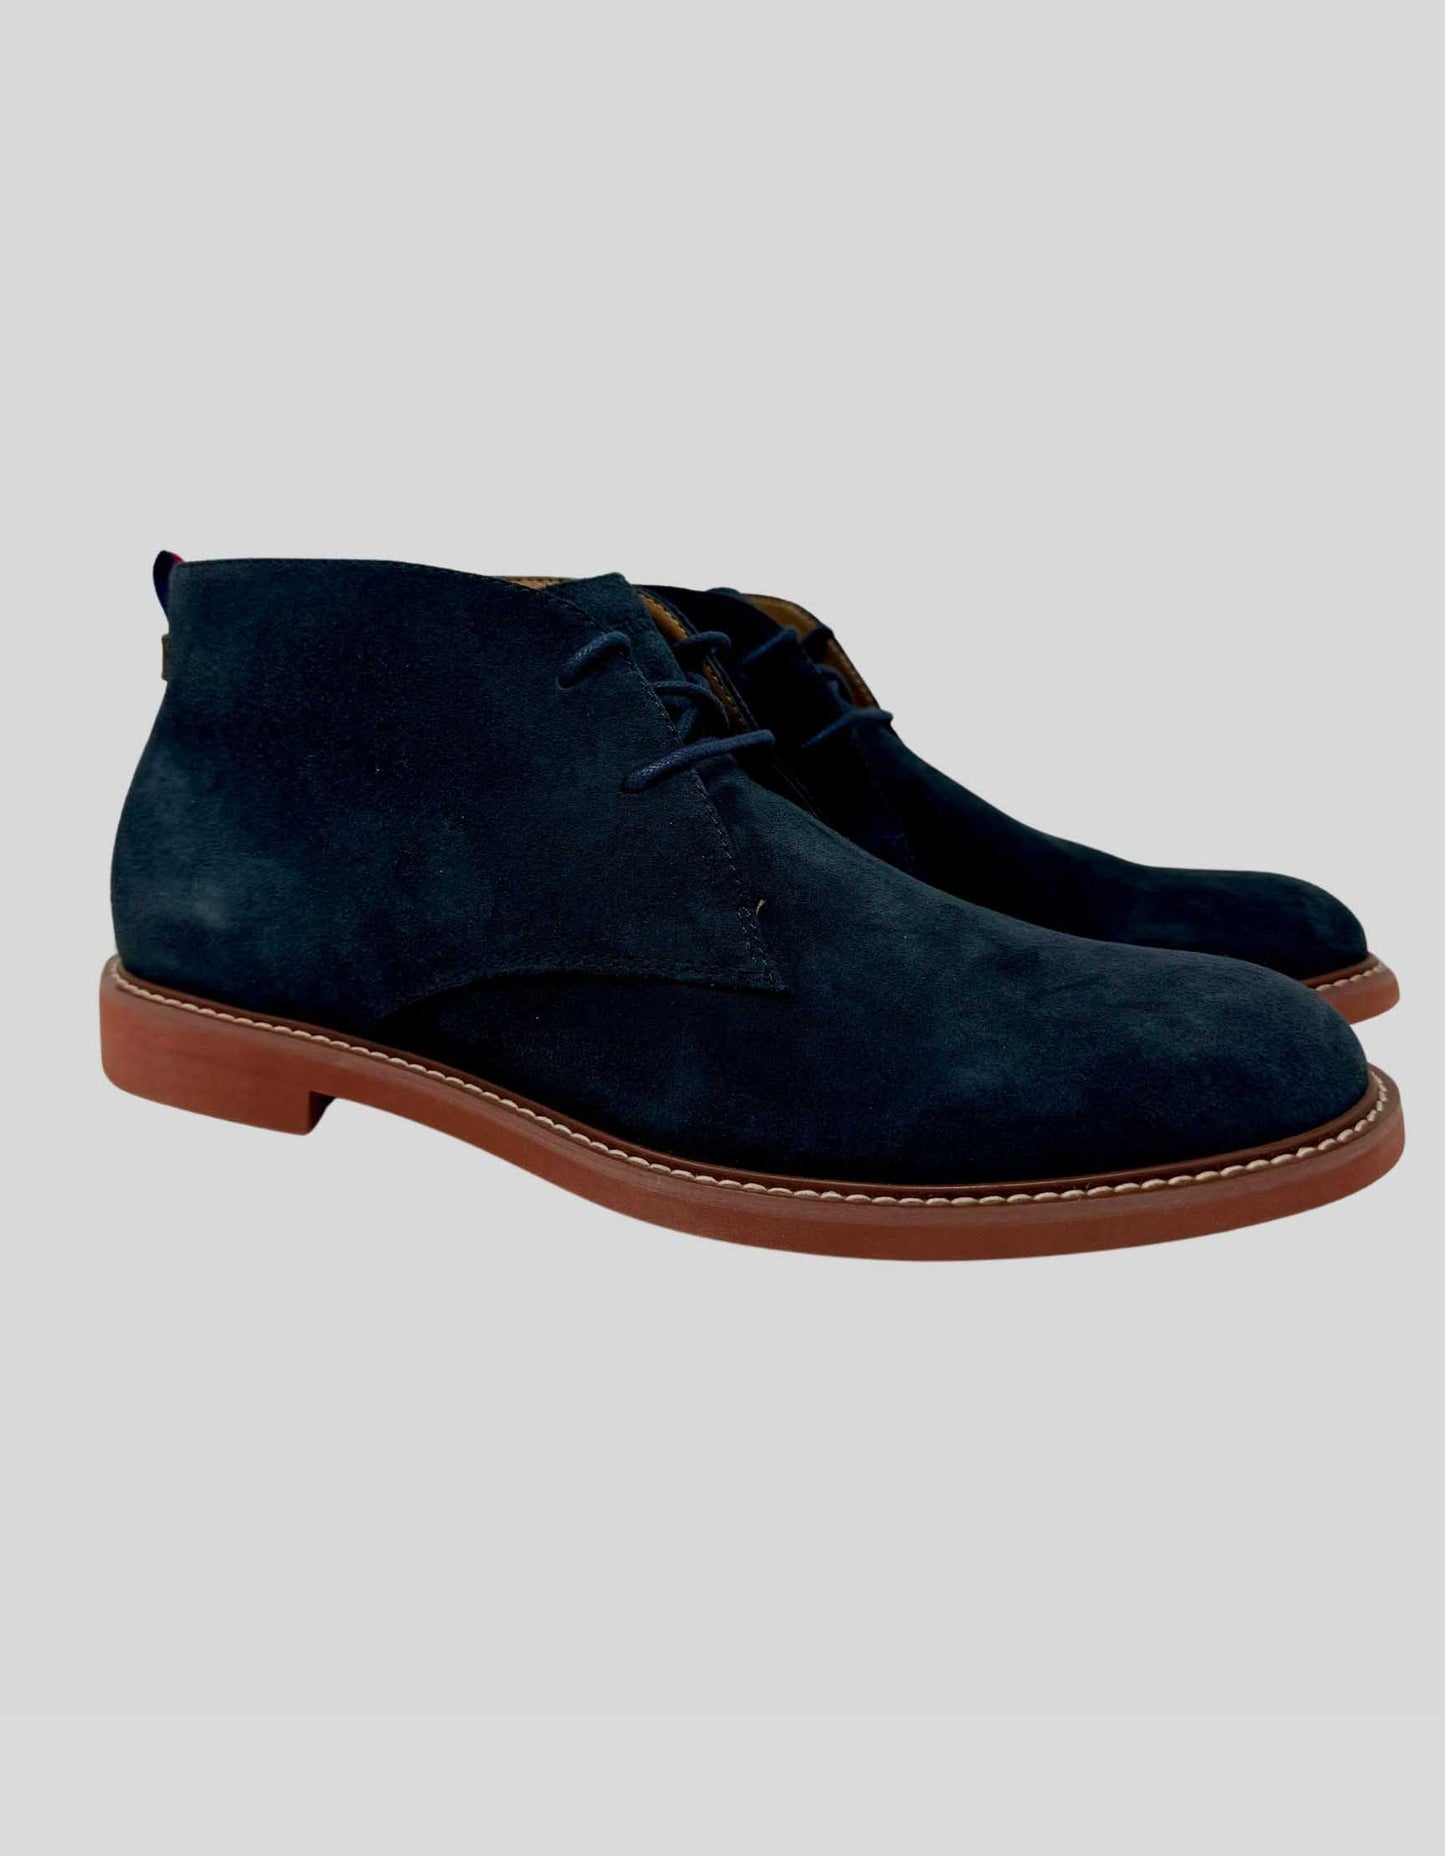 TOMMY HILFIGER Gervis Blue Suede Chukka Boots w/ Tags - 11 M US